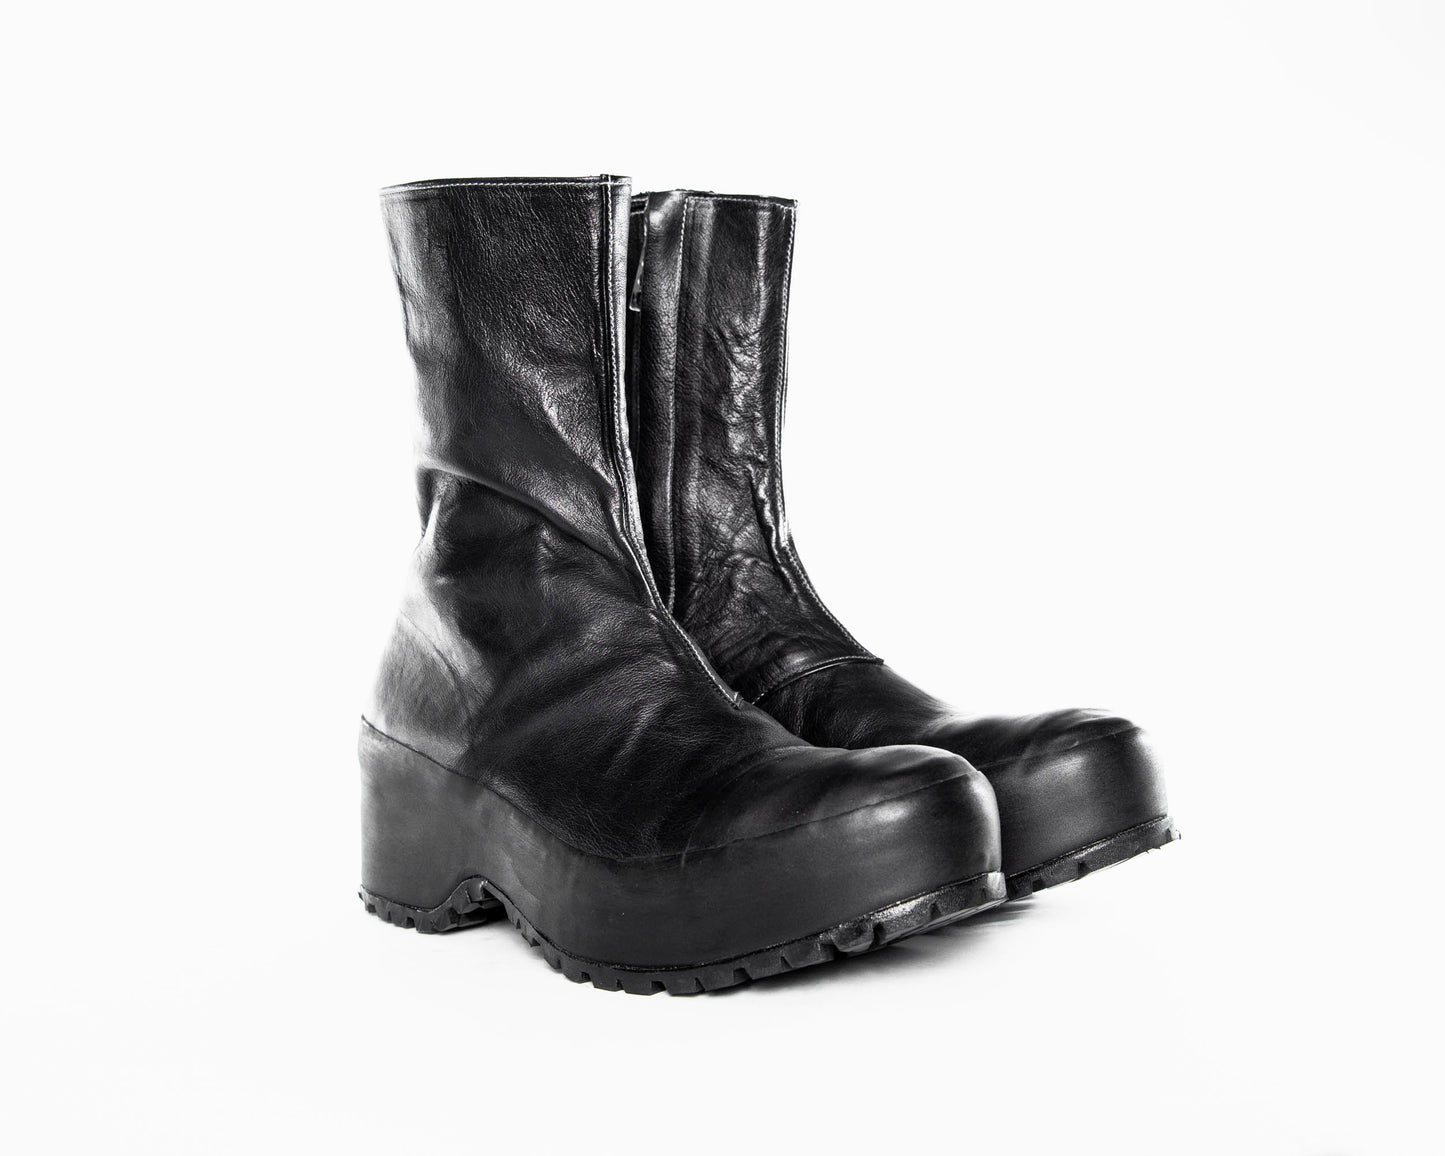 Black Vulcanized Calf Leather Boots by Obscur